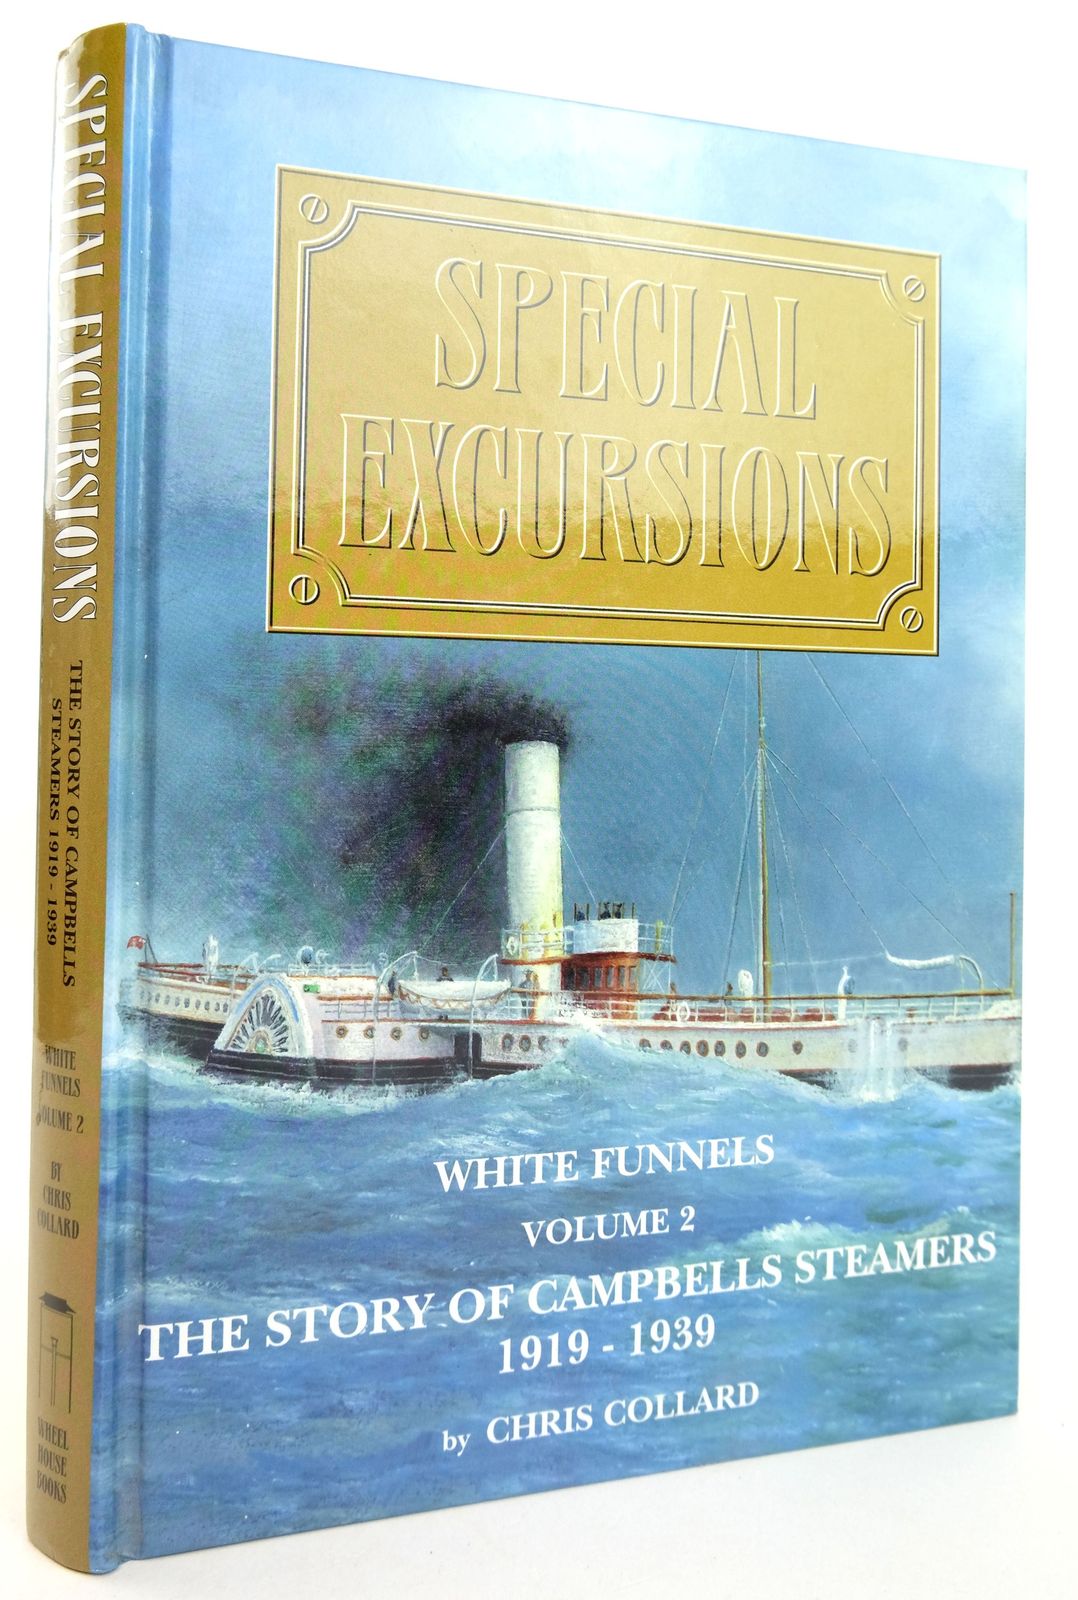 Photo of SPECIAL EXCURSIONS WHITE FUNNELS VOLUME 2 written by Collard, Chris published by Wheelhouse Books (STOCK CODE: 1819360)  for sale by Stella & Rose's Books